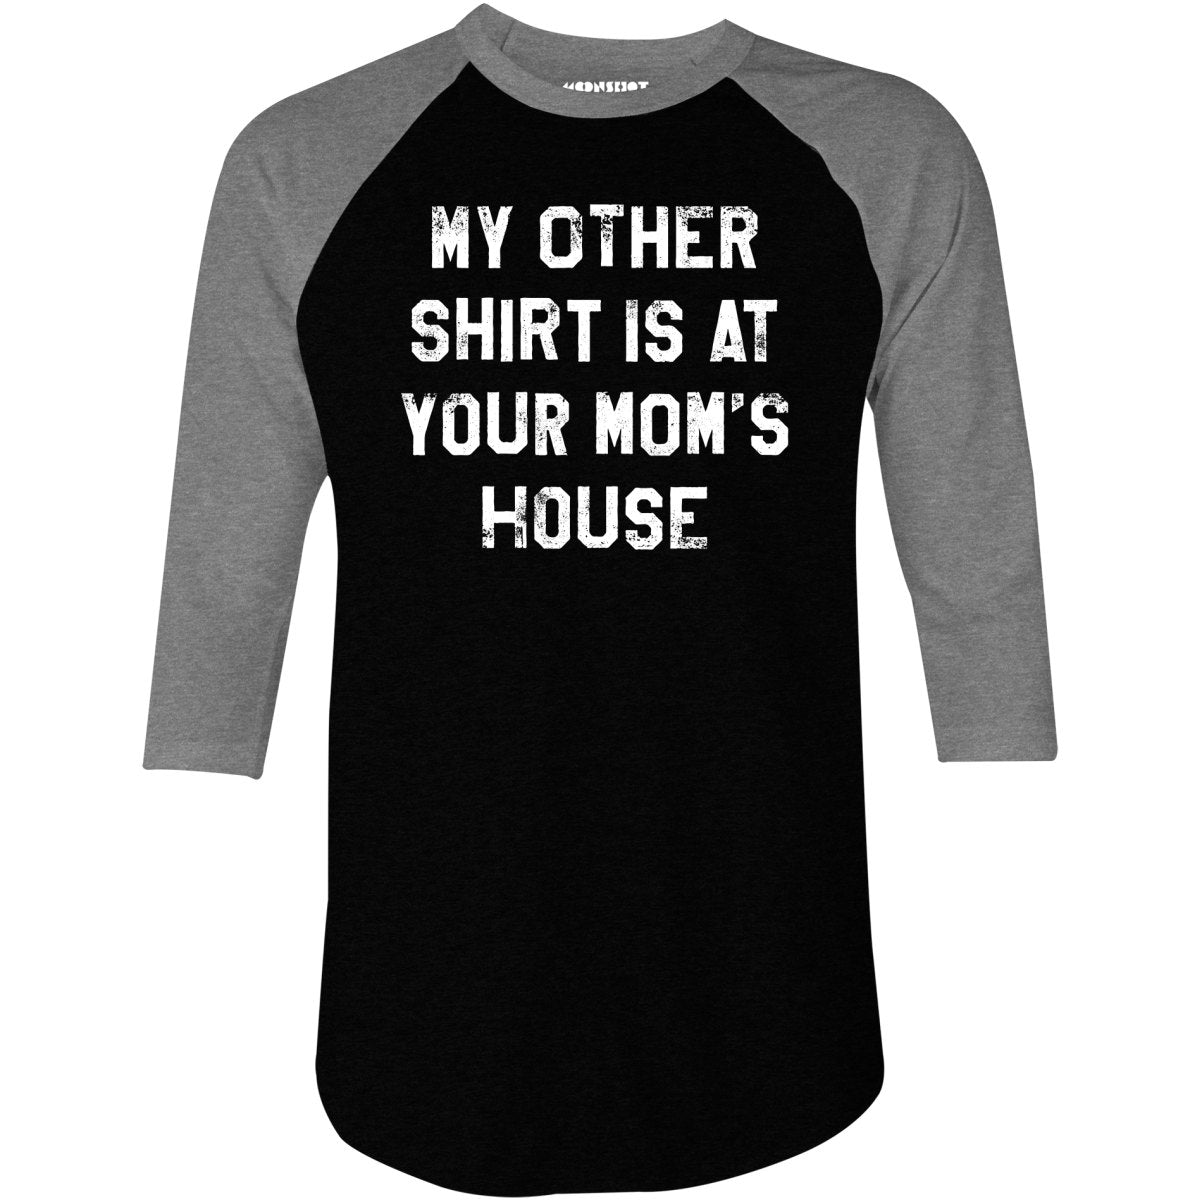 My Other Shirt Is At Your Mom's House - 3/4 Sleeve Raglan T-Shirt